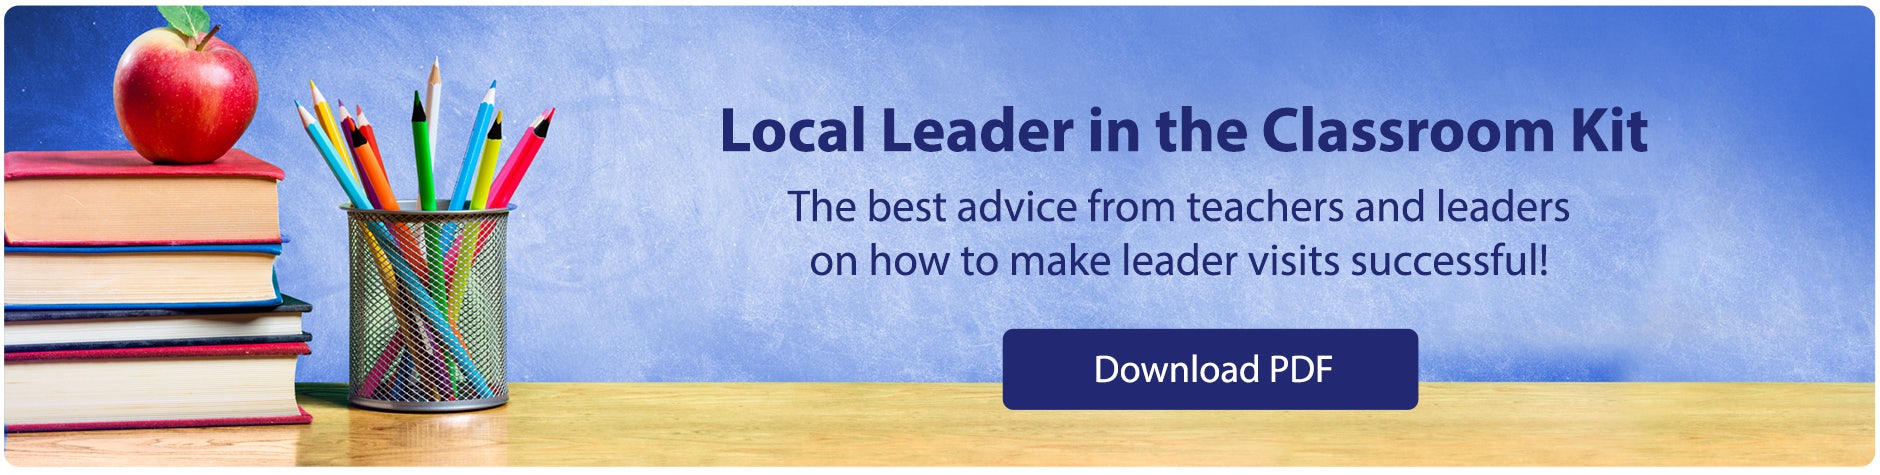 Download our Local Leader in the Classroom Kit